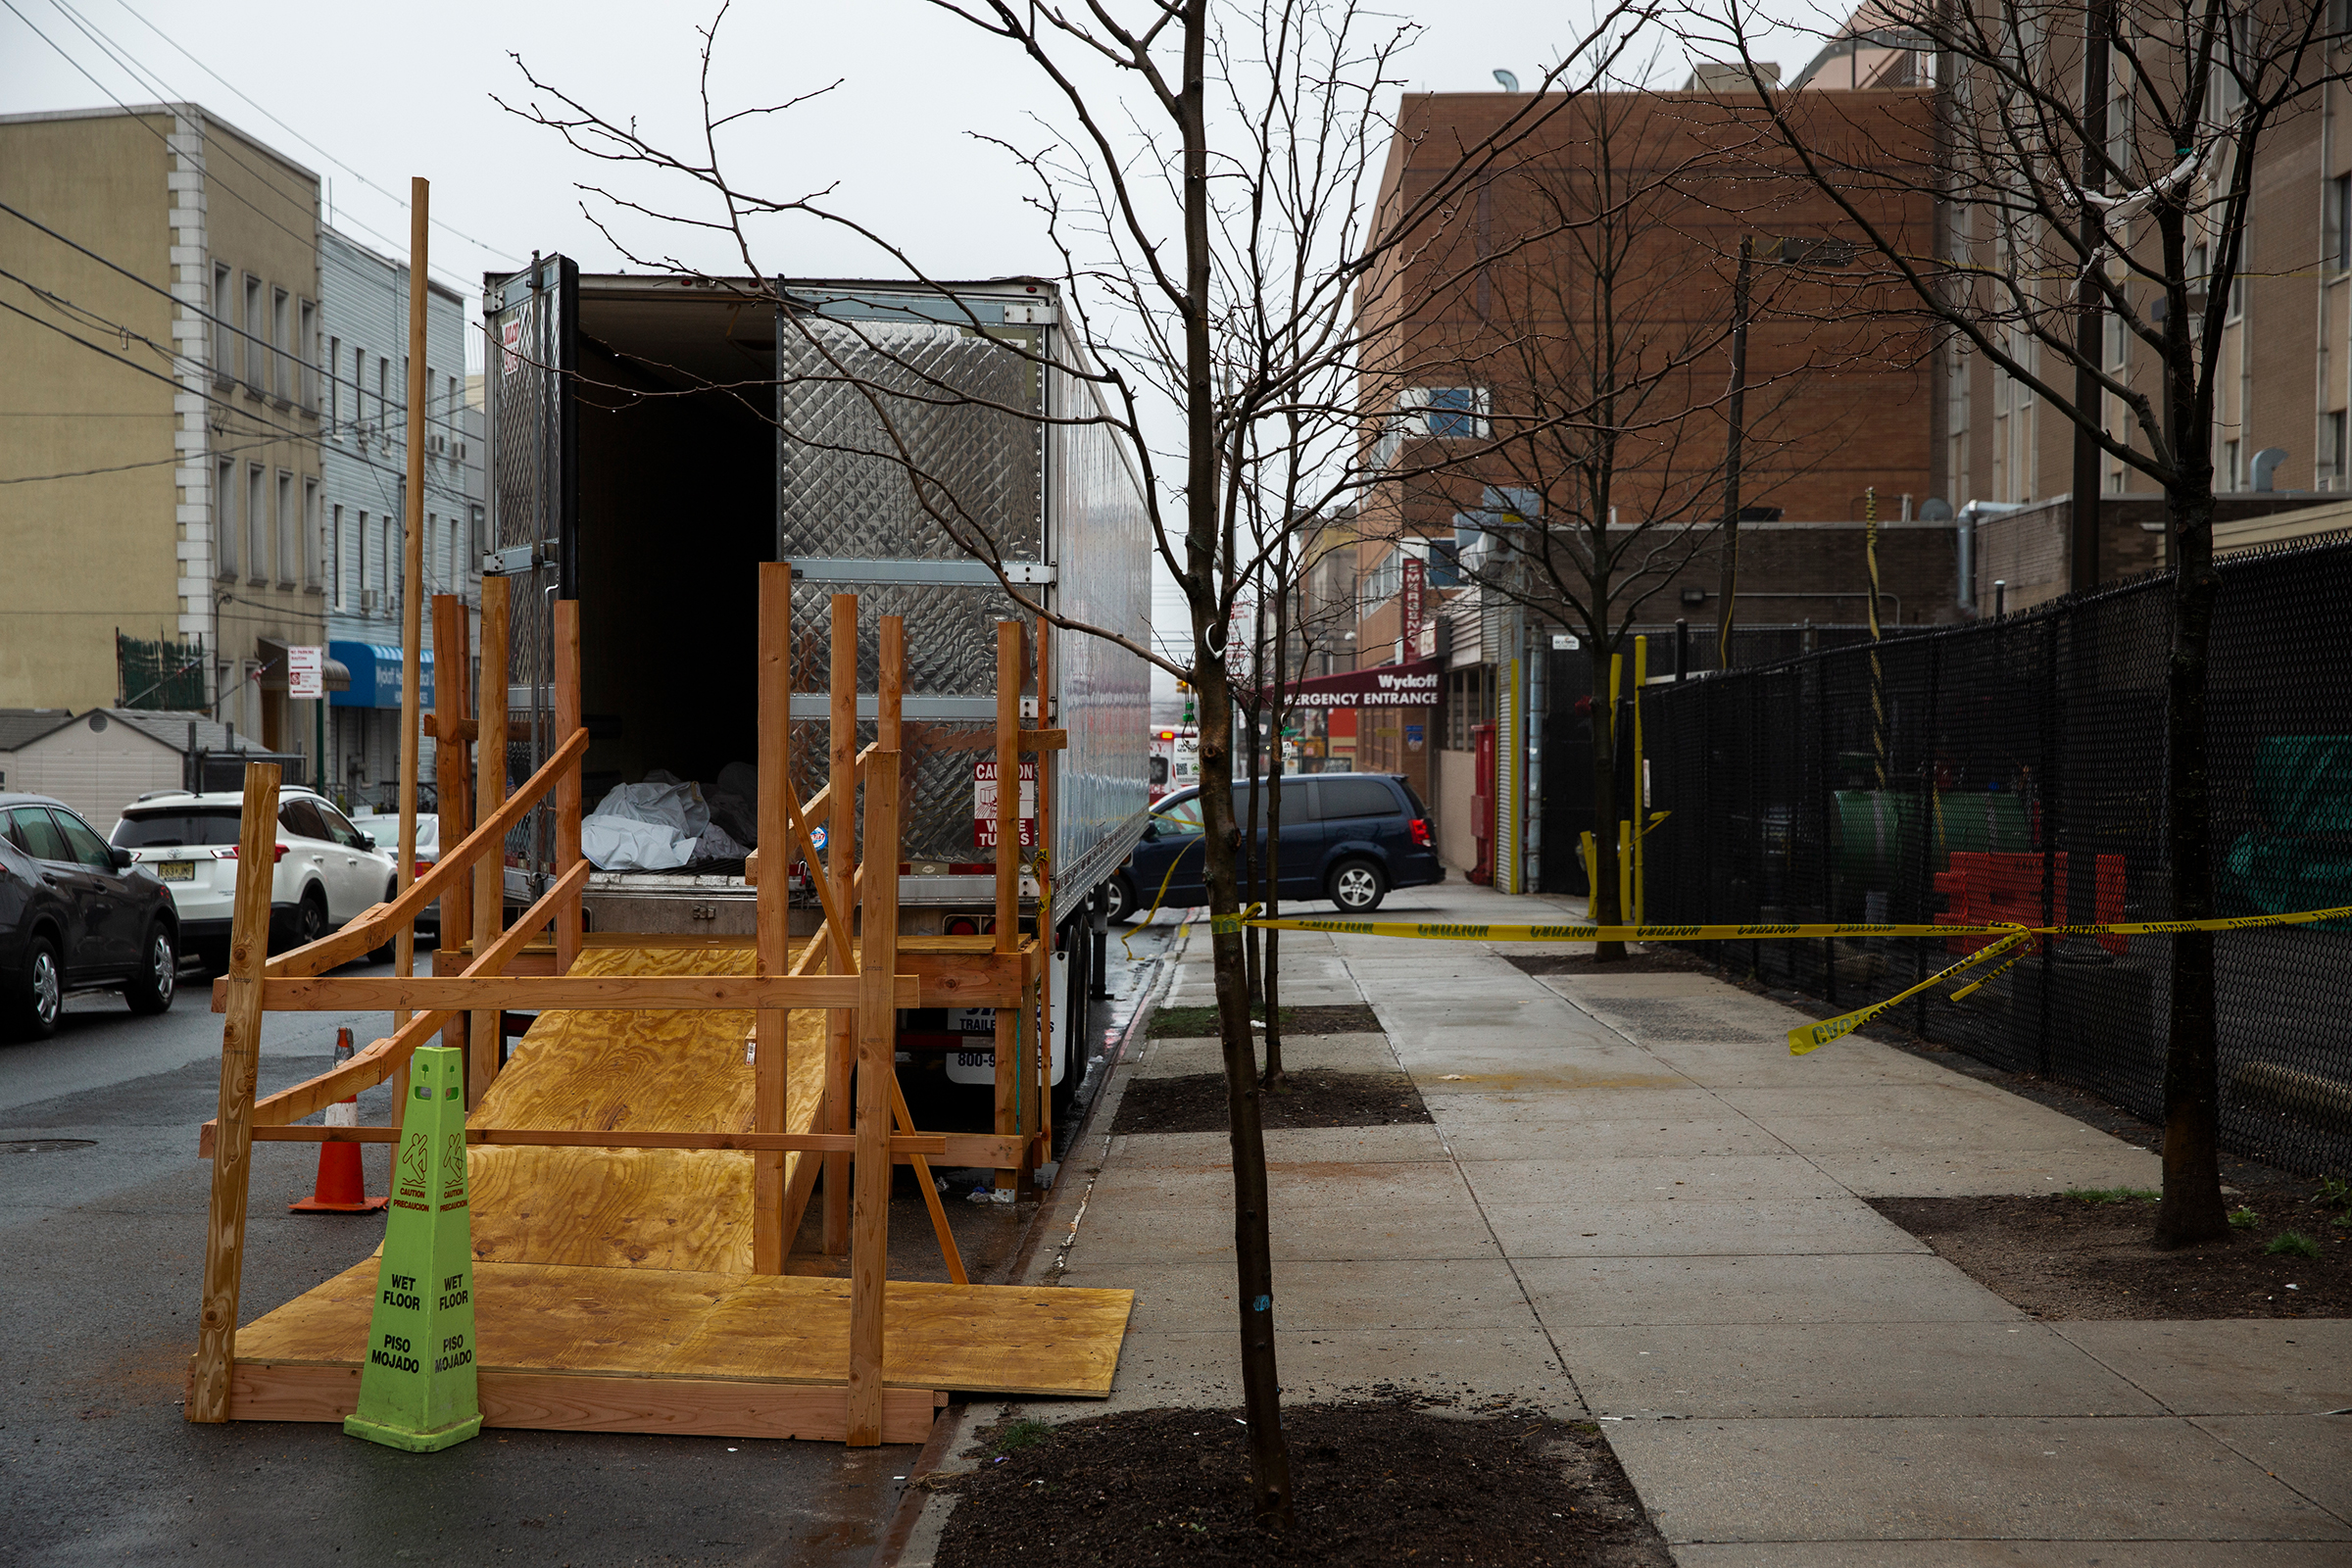 A covered body is seen in the back of a temporary morgue erected outside Wyckoff Heights Medical Center in Brooklyn, New York, on March 29, 2020. (Benjamin Norman for TIME)